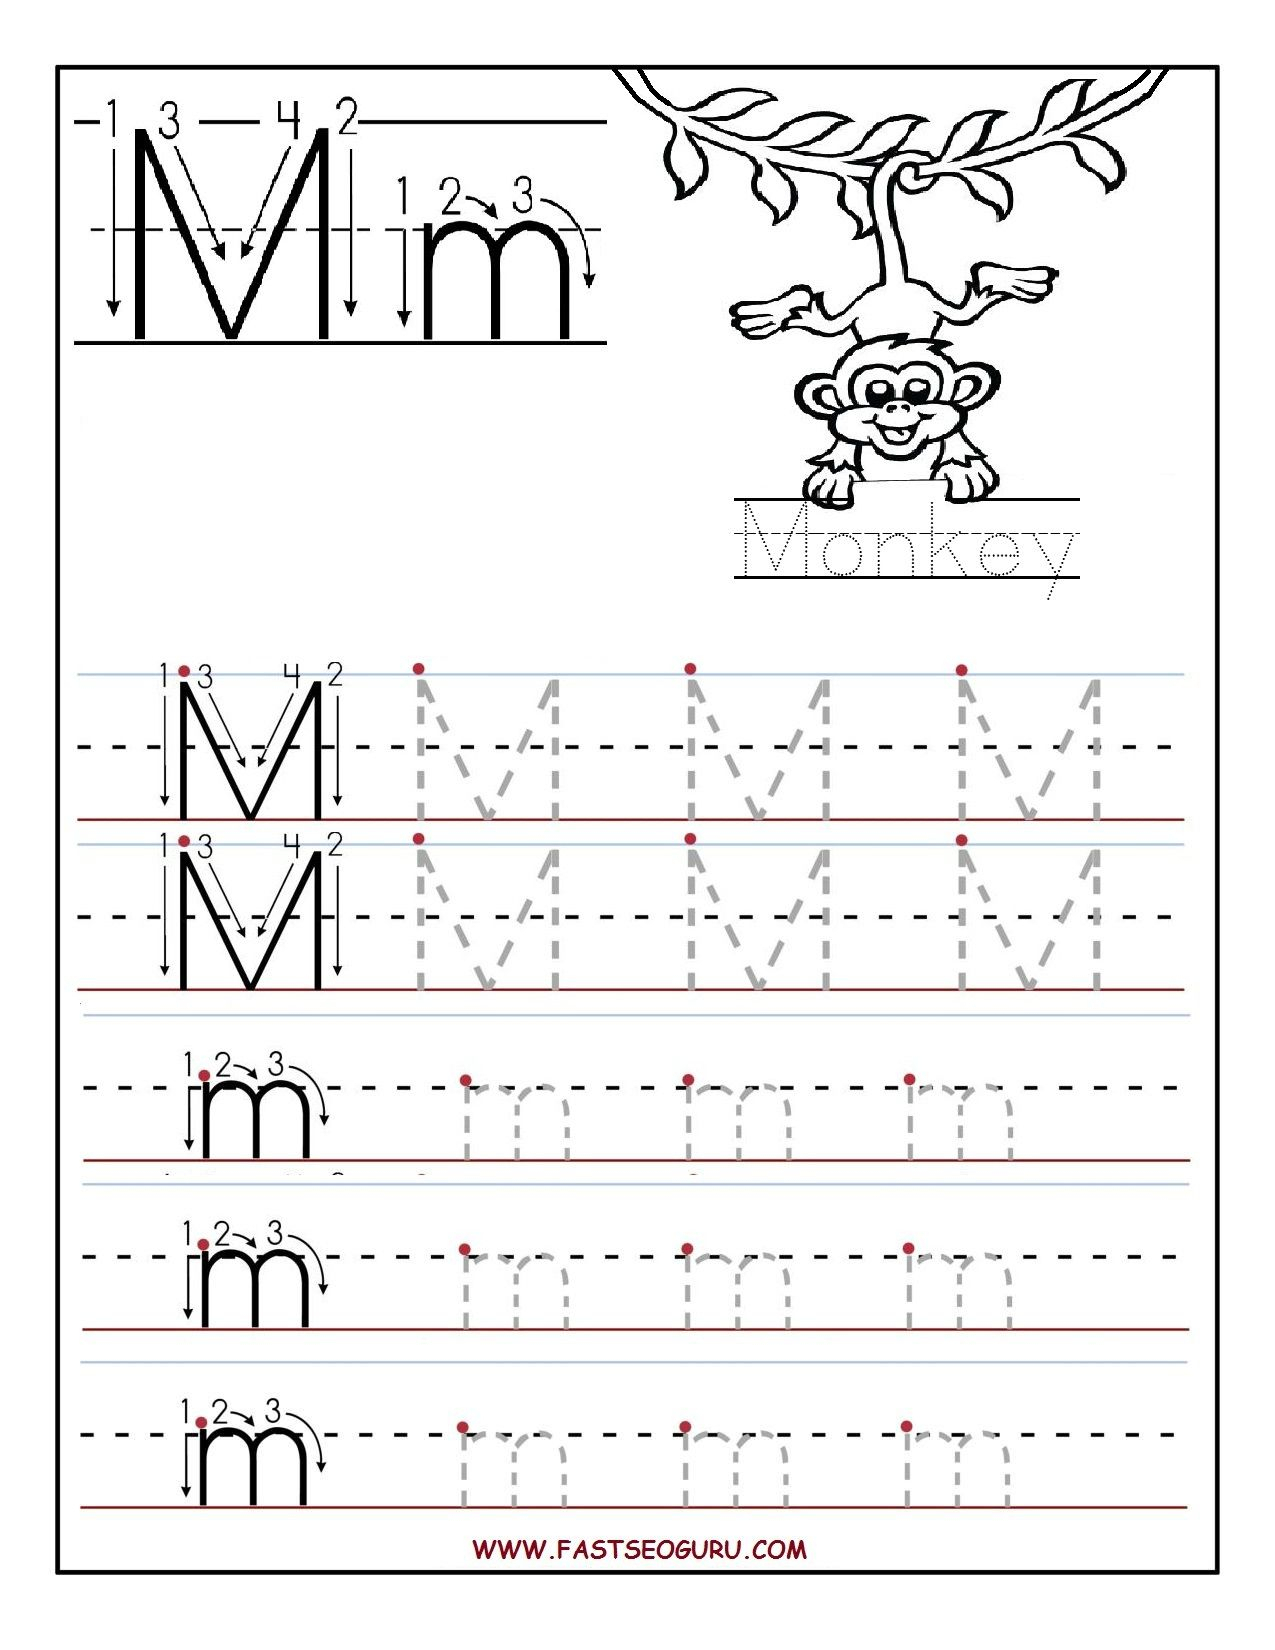 Printable Letter M Tracing Worksheets For Preschool in Tracing Letter M Worksheets Kindergarten